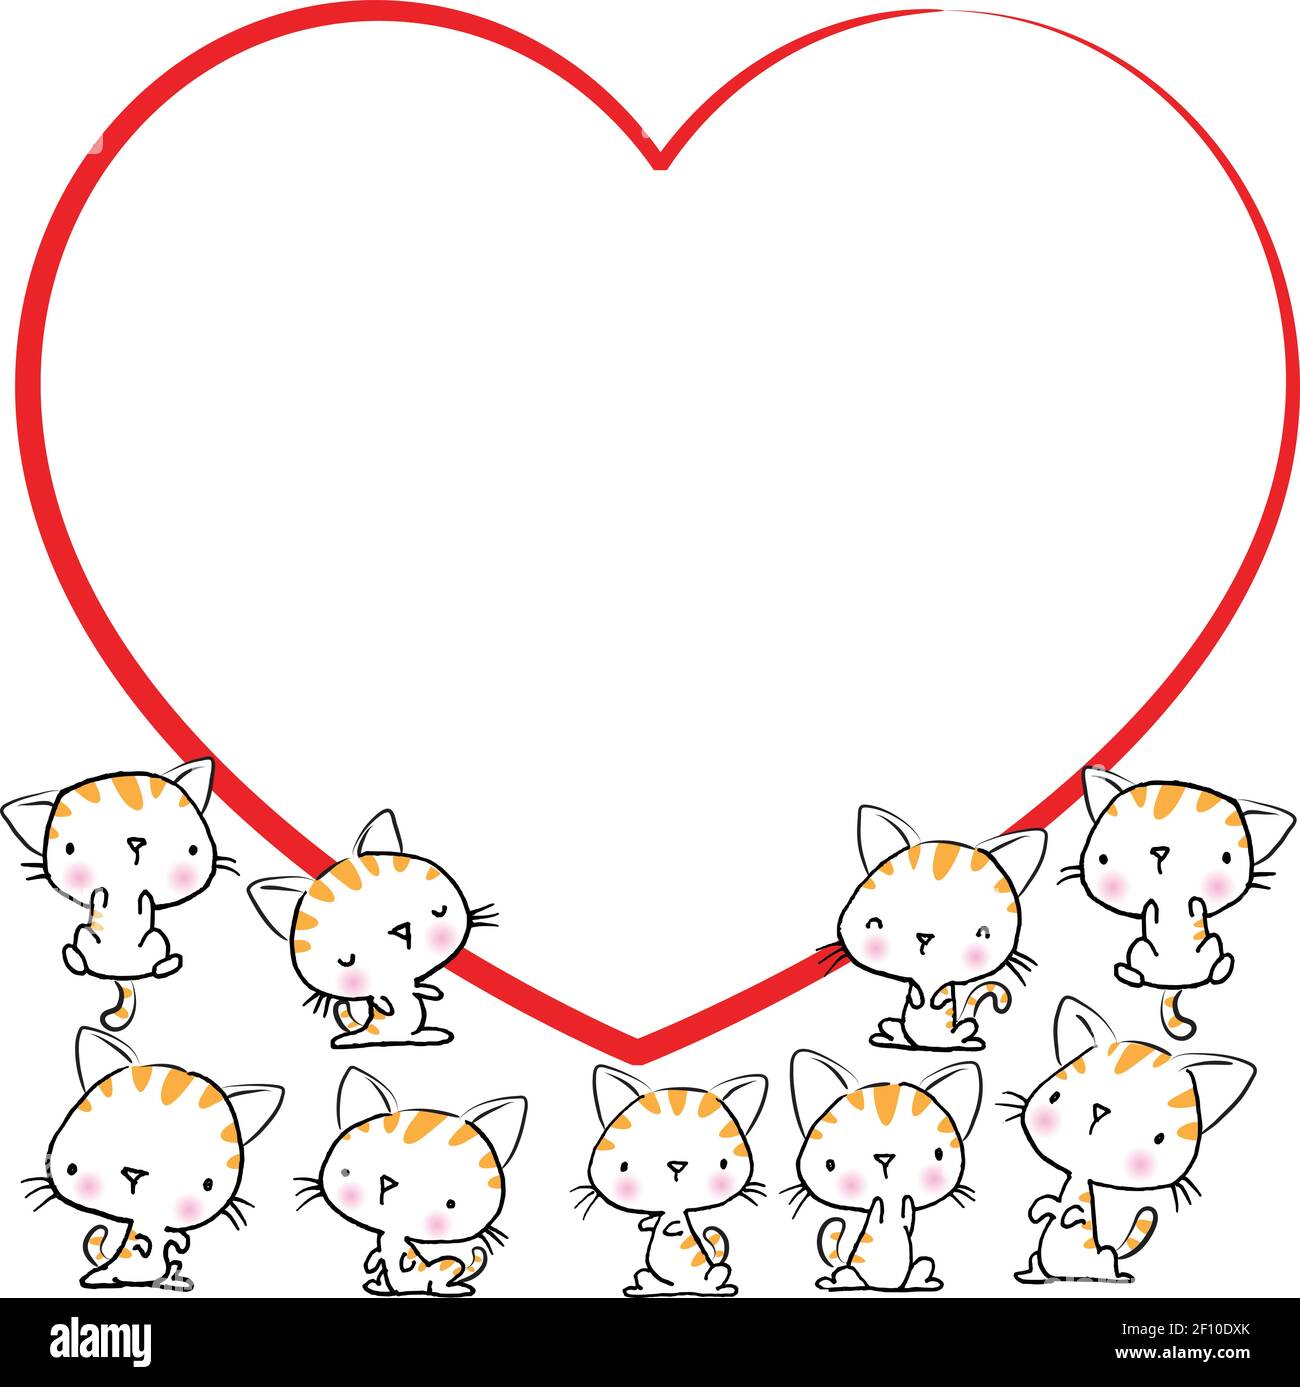 Icon Two Cat Kissing Inside Heart Stock Vector (Royalty Free